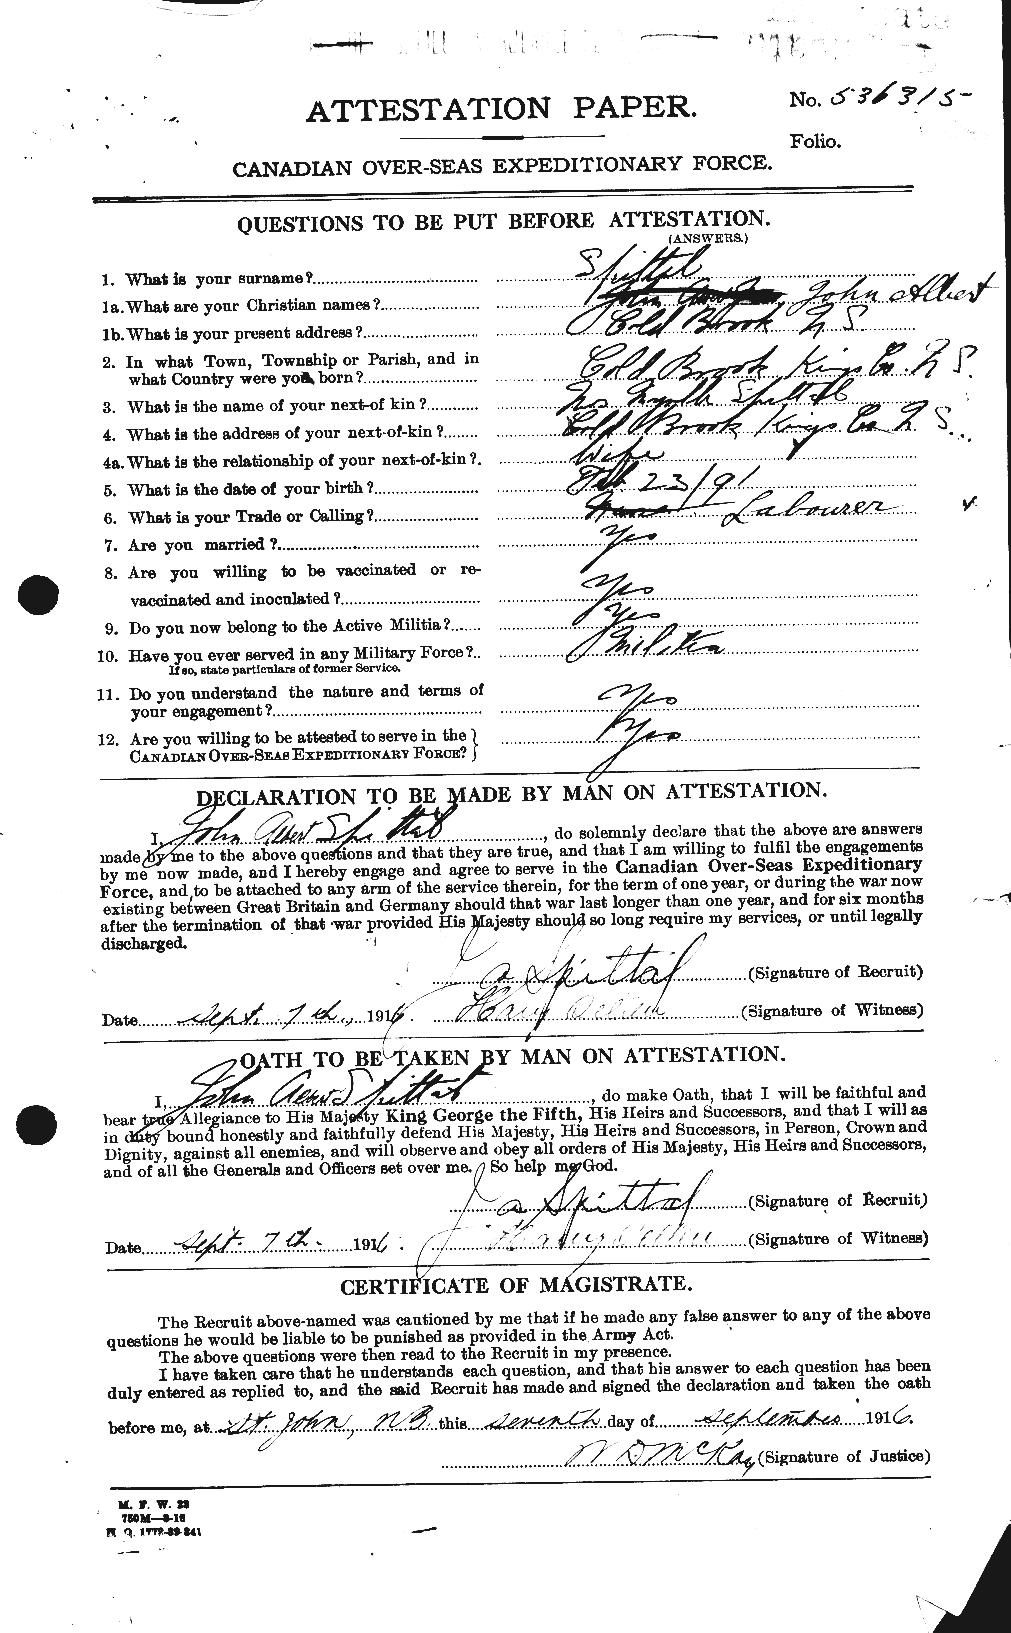 Personnel Records of the First World War - CEF 114366a